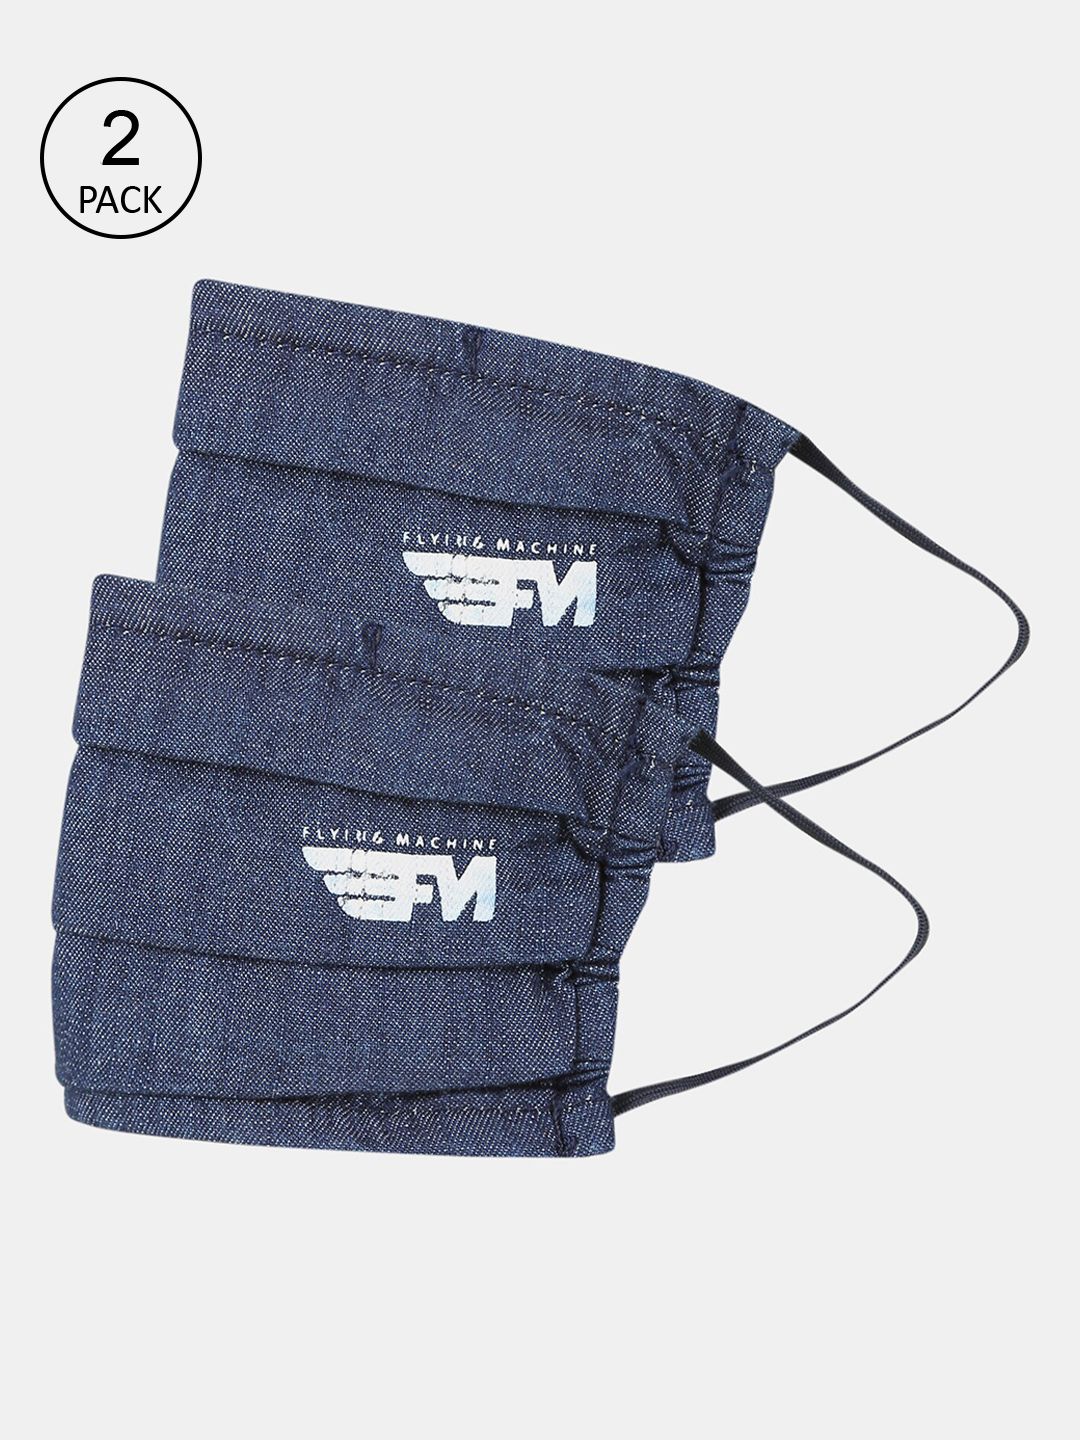 Flying Machine Unisex Pack Of 2 Blue & White Solid 3-Ply Reusable Denim Cloth Masks Price in India